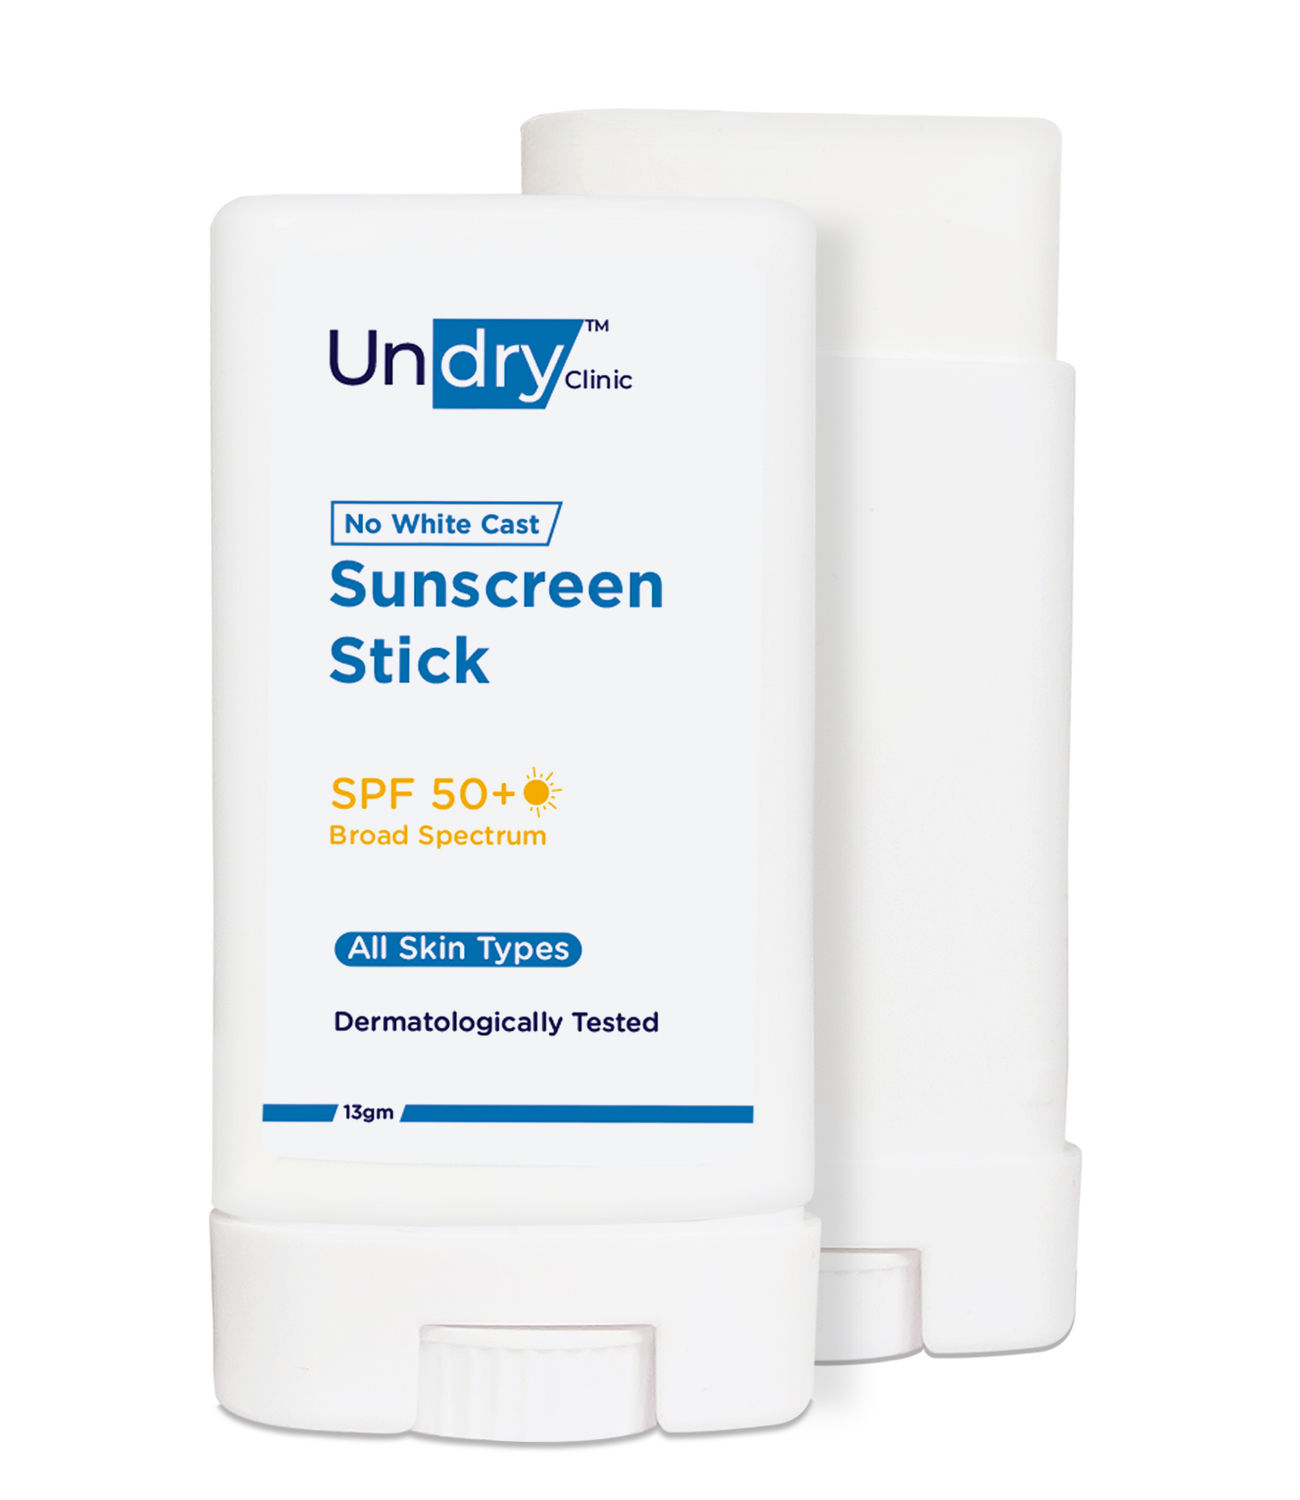 https://media6.ppl-media.com//tr:h-750,w-750,c-at_max,dpr-2/static/img/product/361891/undry-sunscreen-stick-spf-50-for-face-with-vitamin-c-no-white-cast-dermatologically-tested-13gm_1_display_1692024466_6a1c667f.jpg